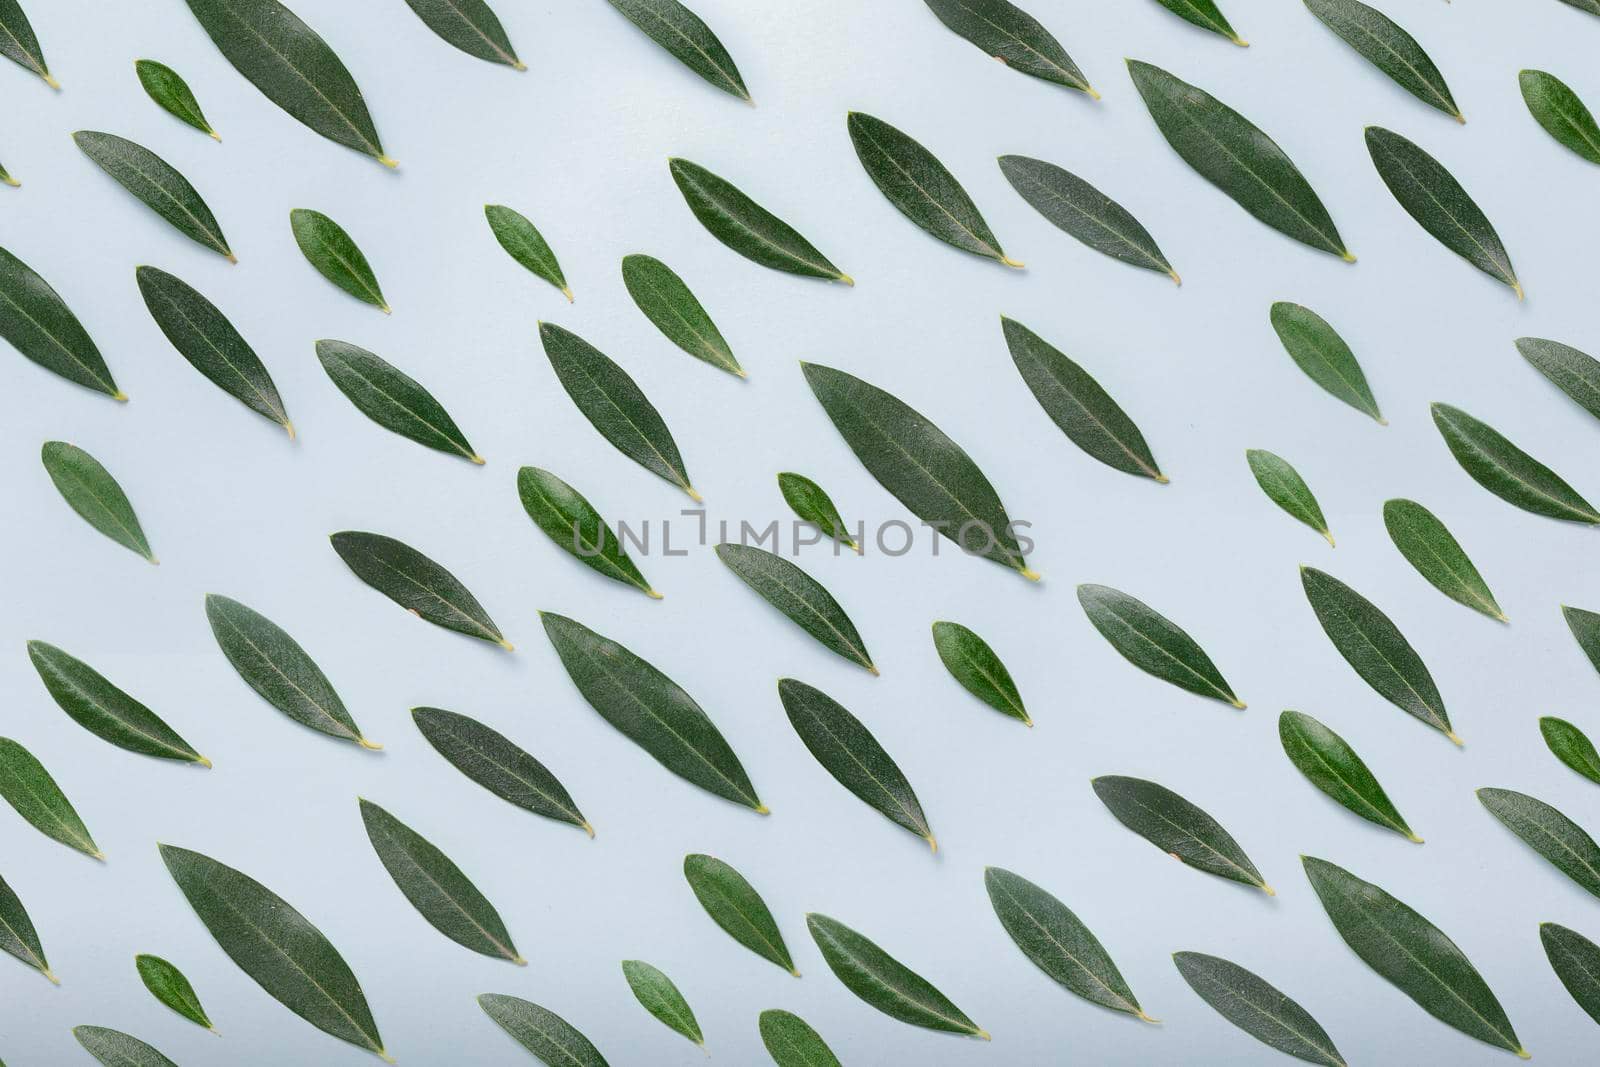 Cute background texture and pattern of olive leaves by alvarobueno